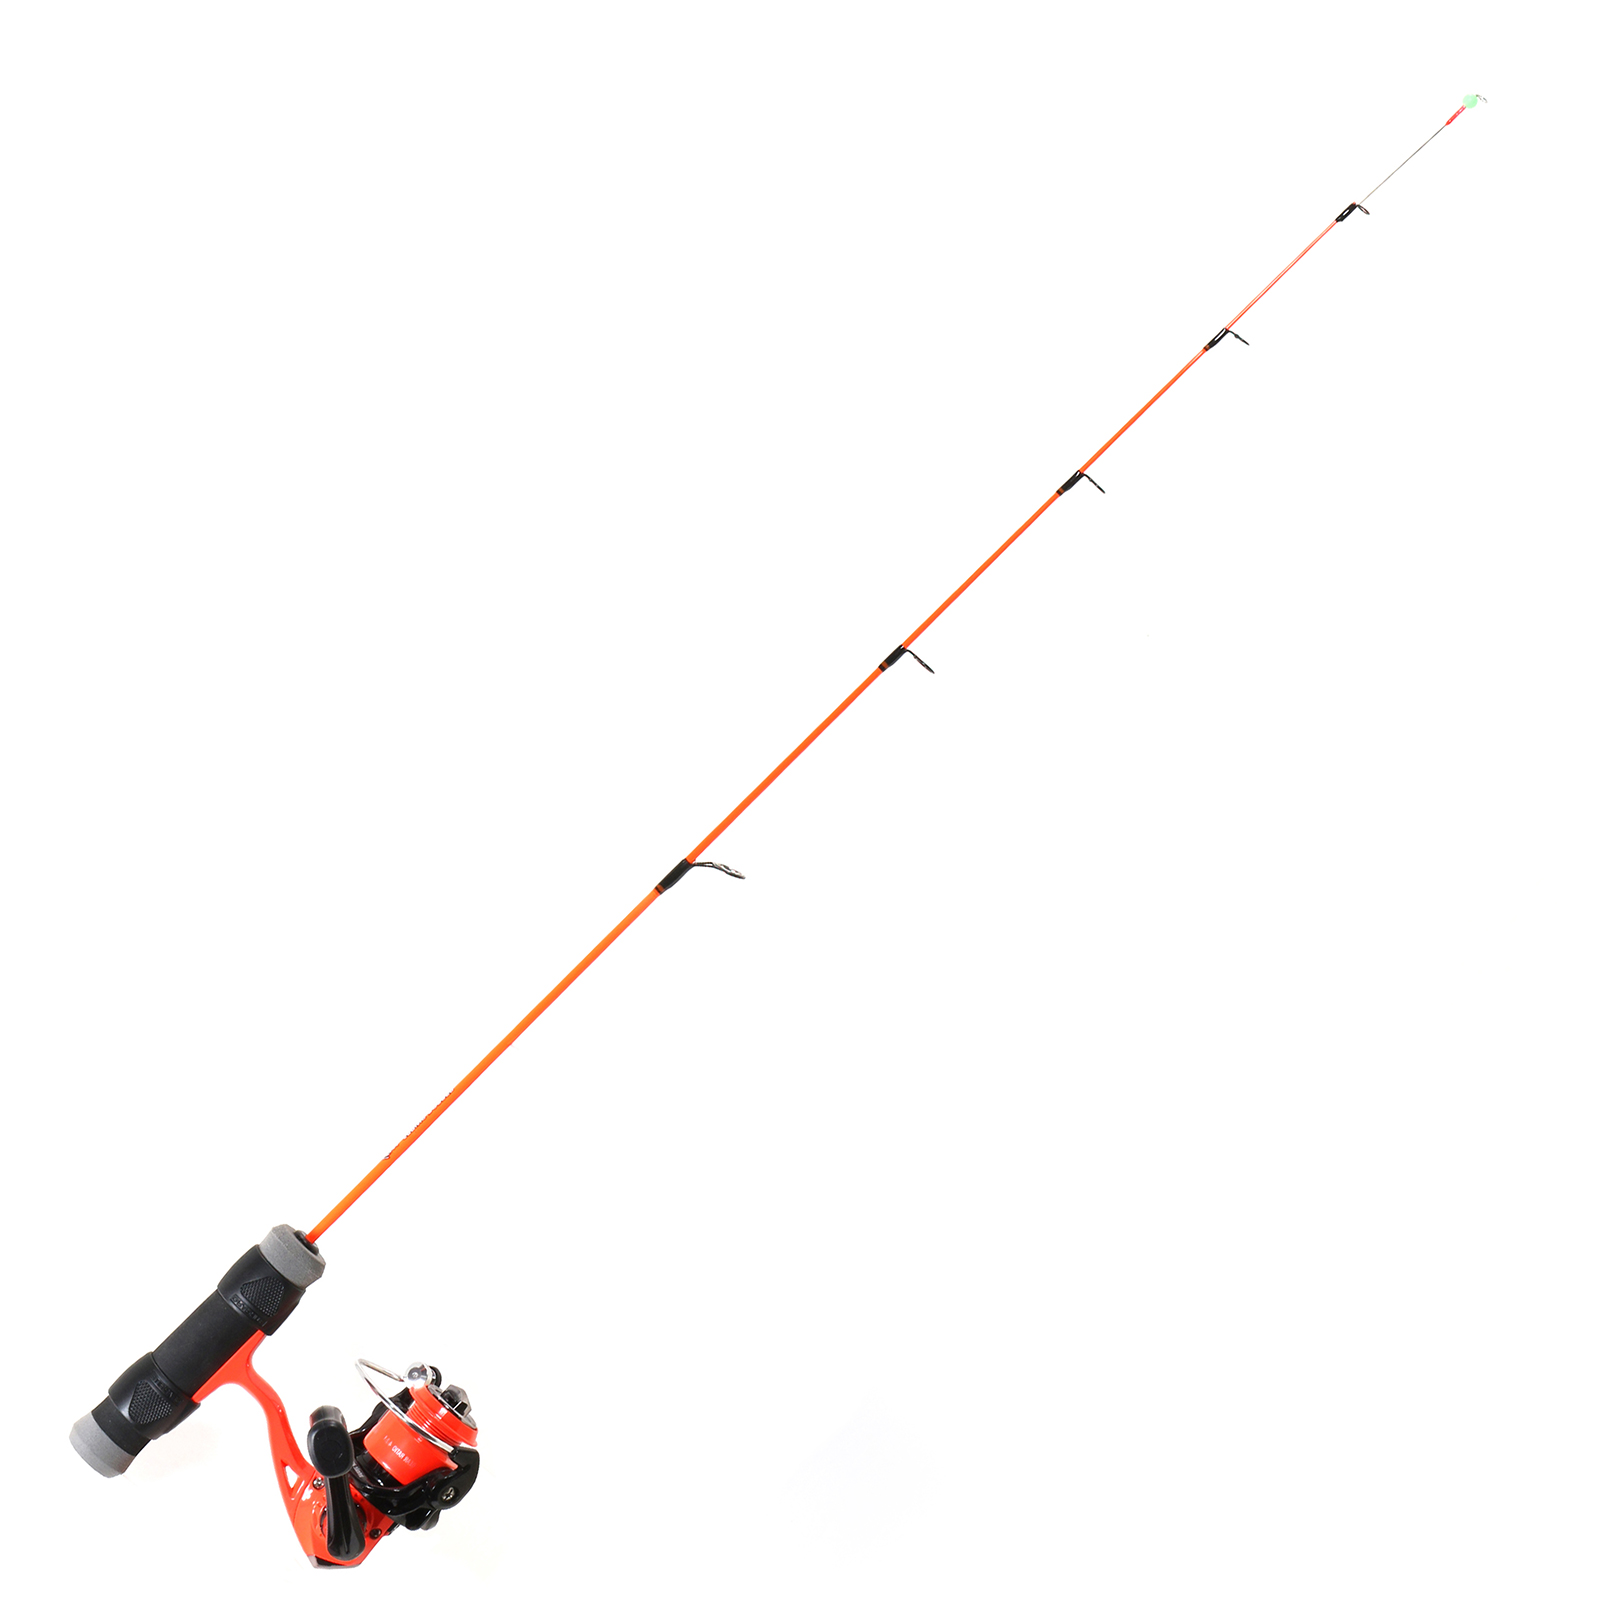 Clam Dave Genz Spring Bobber Ice Rod & Reel Spinning Combo - FishUSA